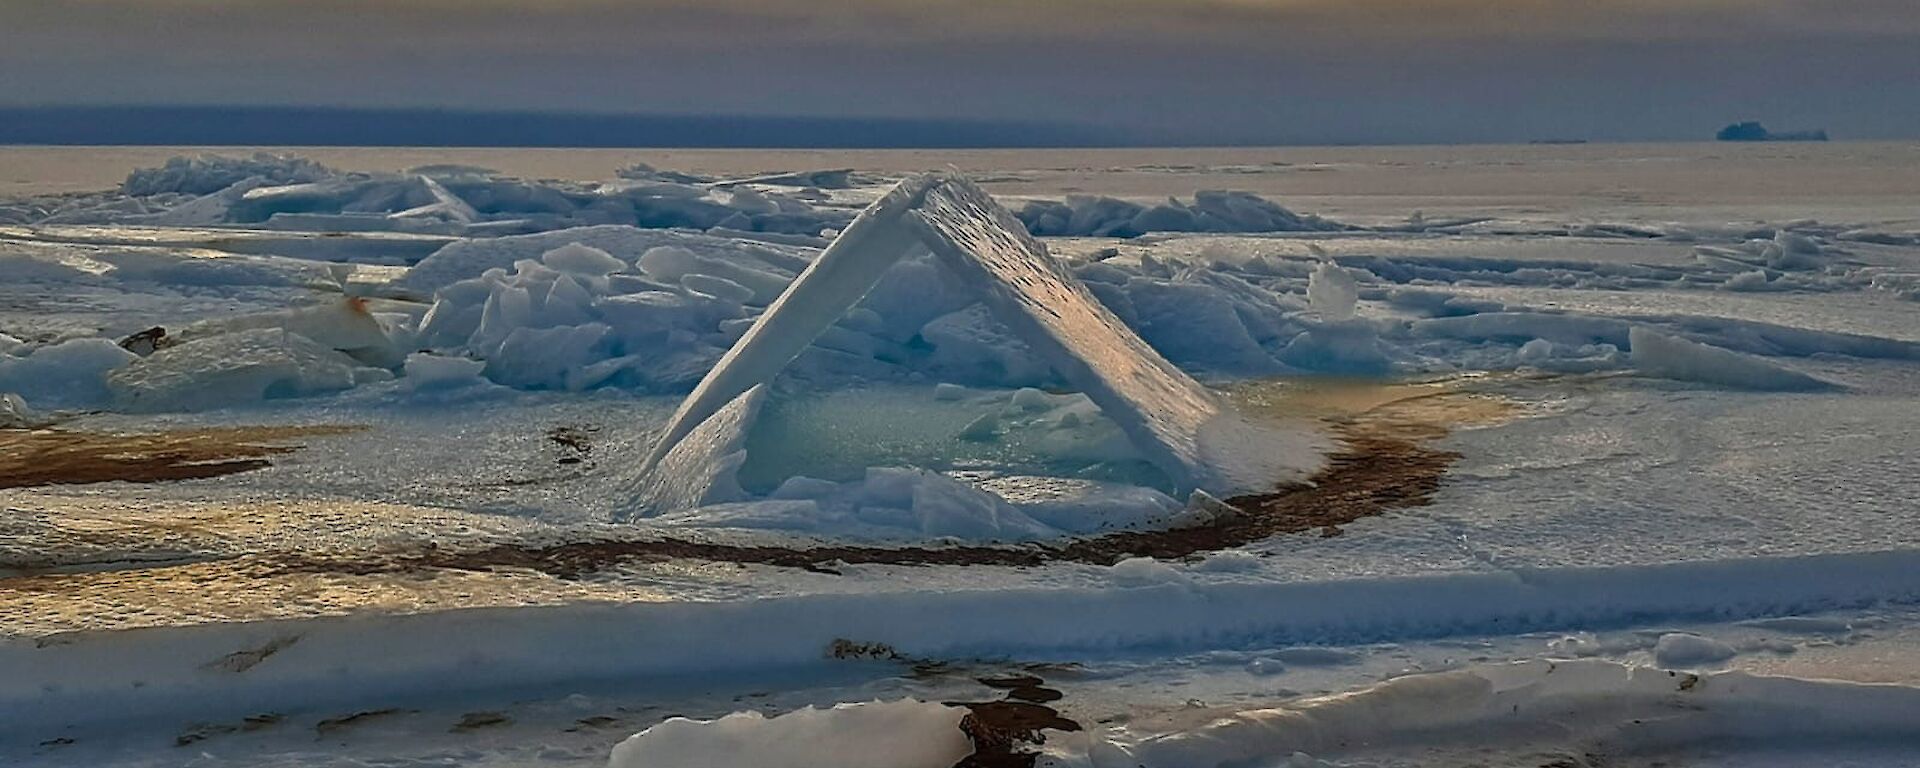 Sea ice formation of ice pushed together like the roof of a house